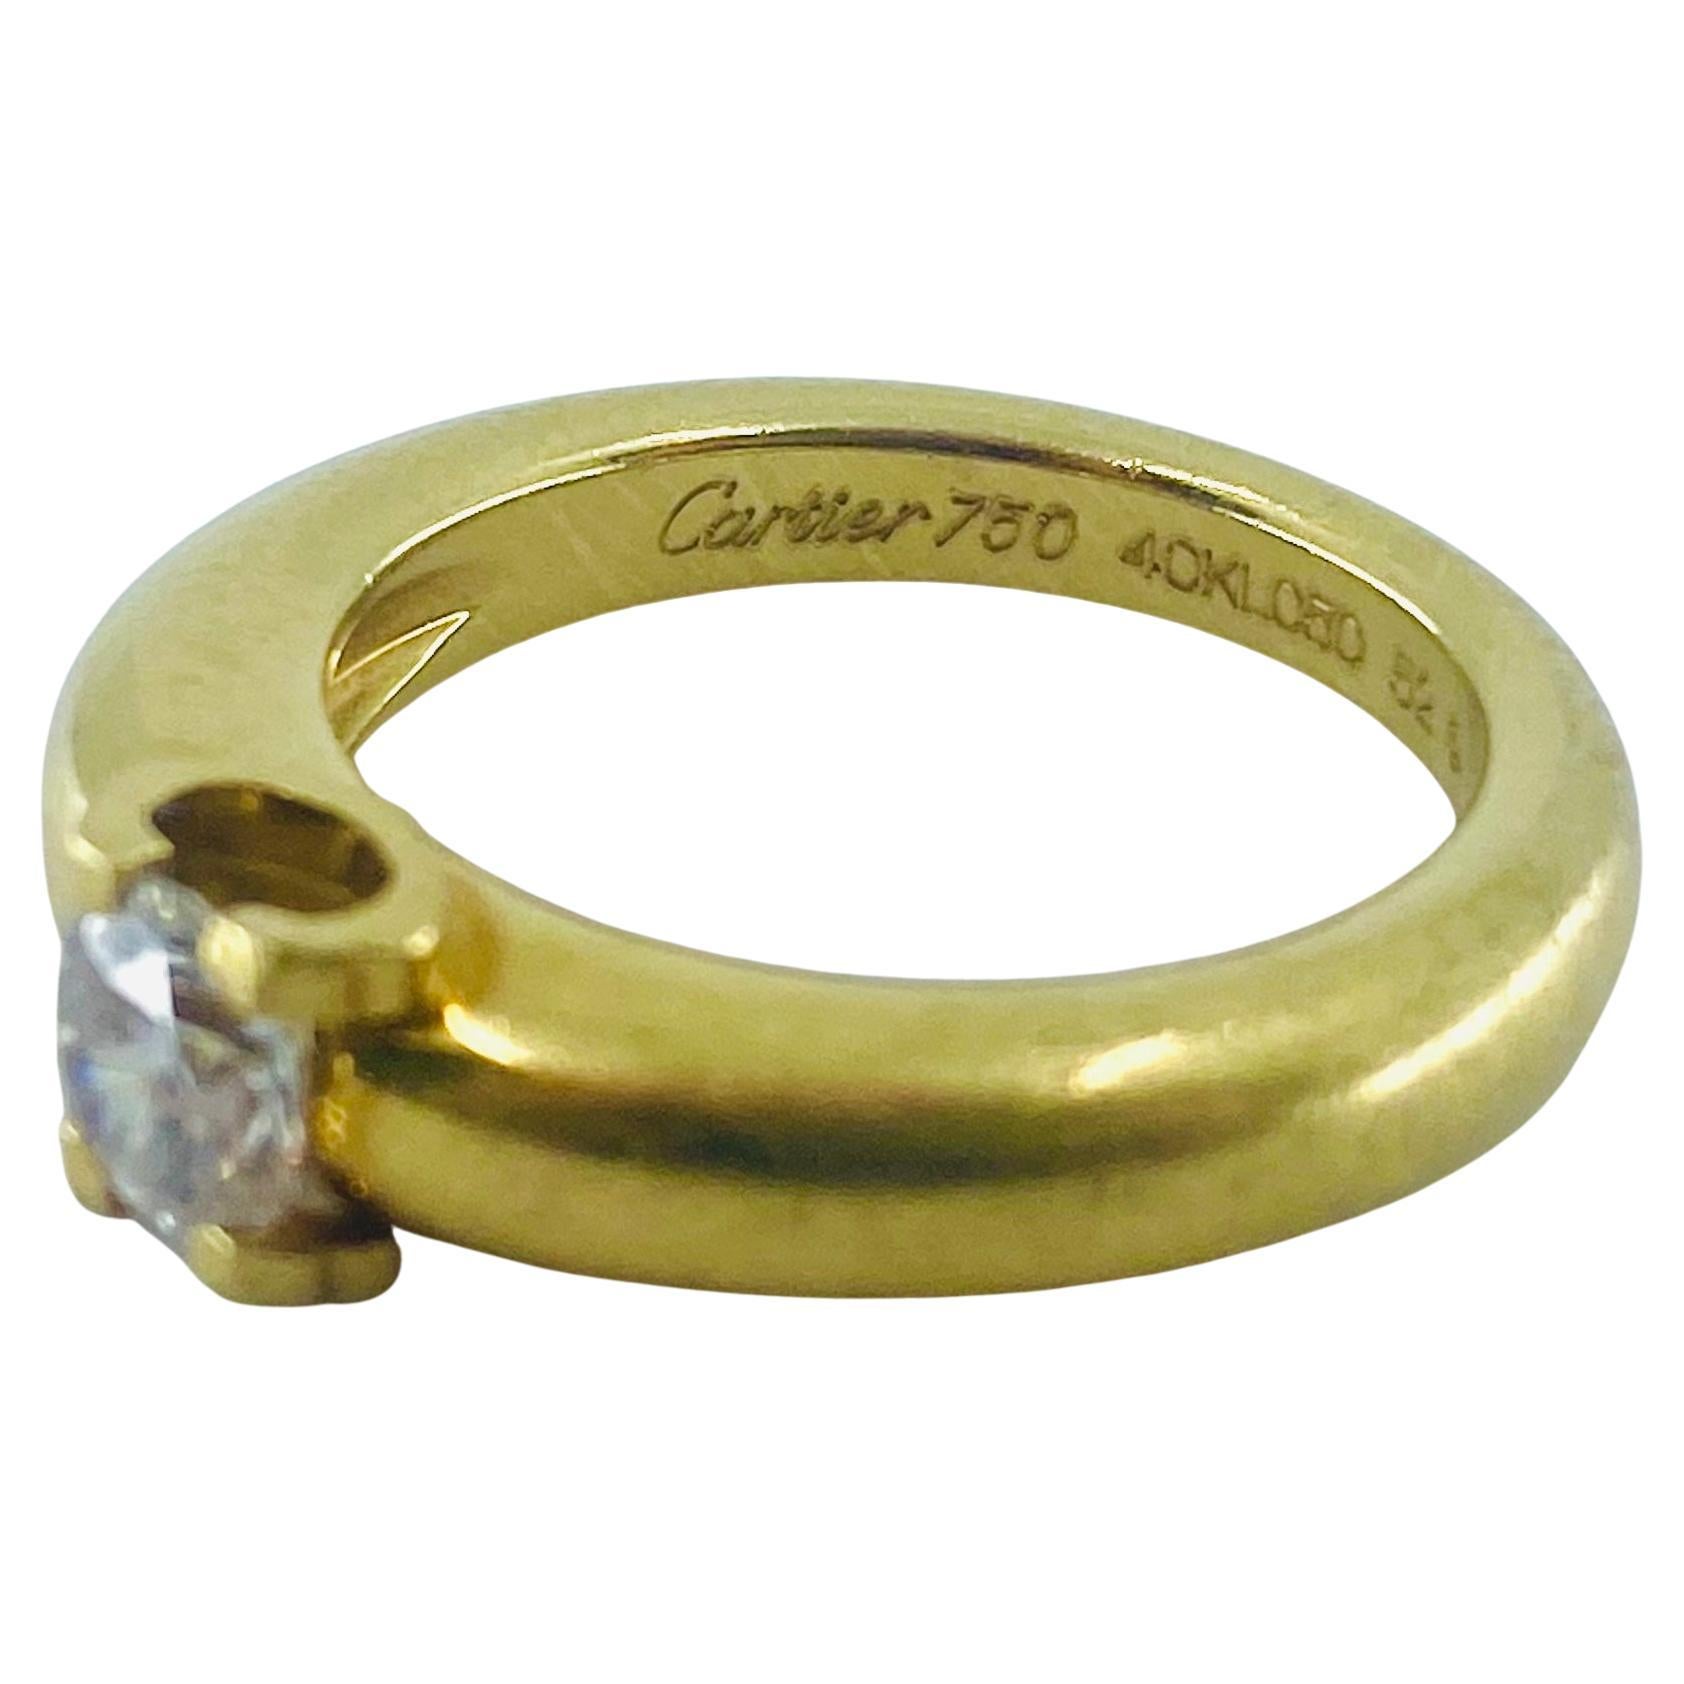 Cartier Solitaire Diamond Ring 18k Gold  1